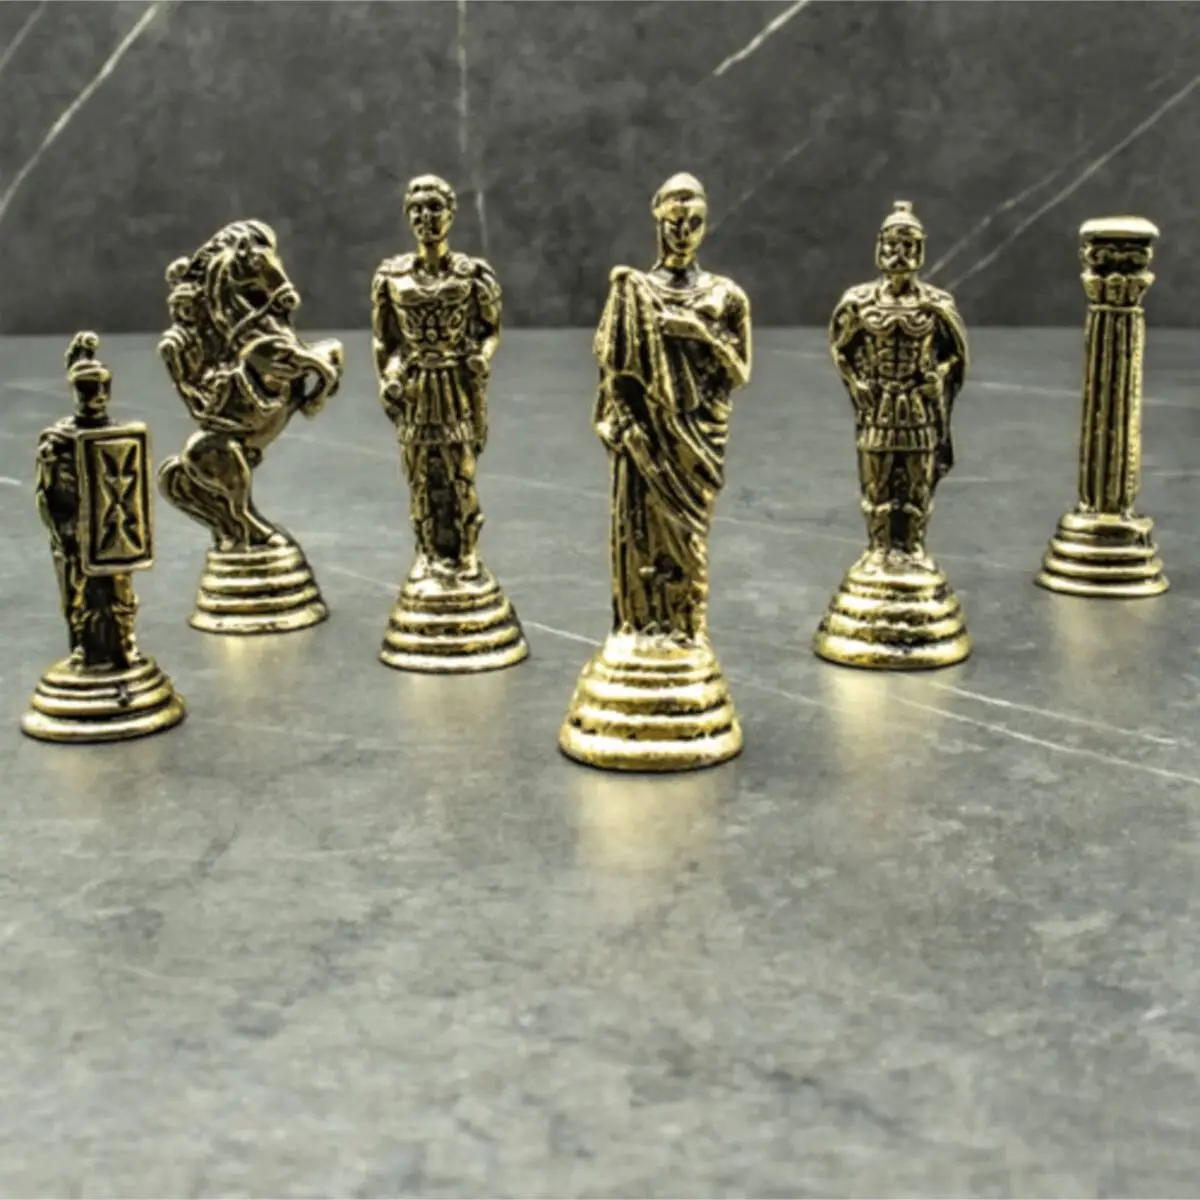 Ancient Persian Chess Set Mythological Stones Zinc Alloy Metal Material For Have Good Time Only Stone No Board